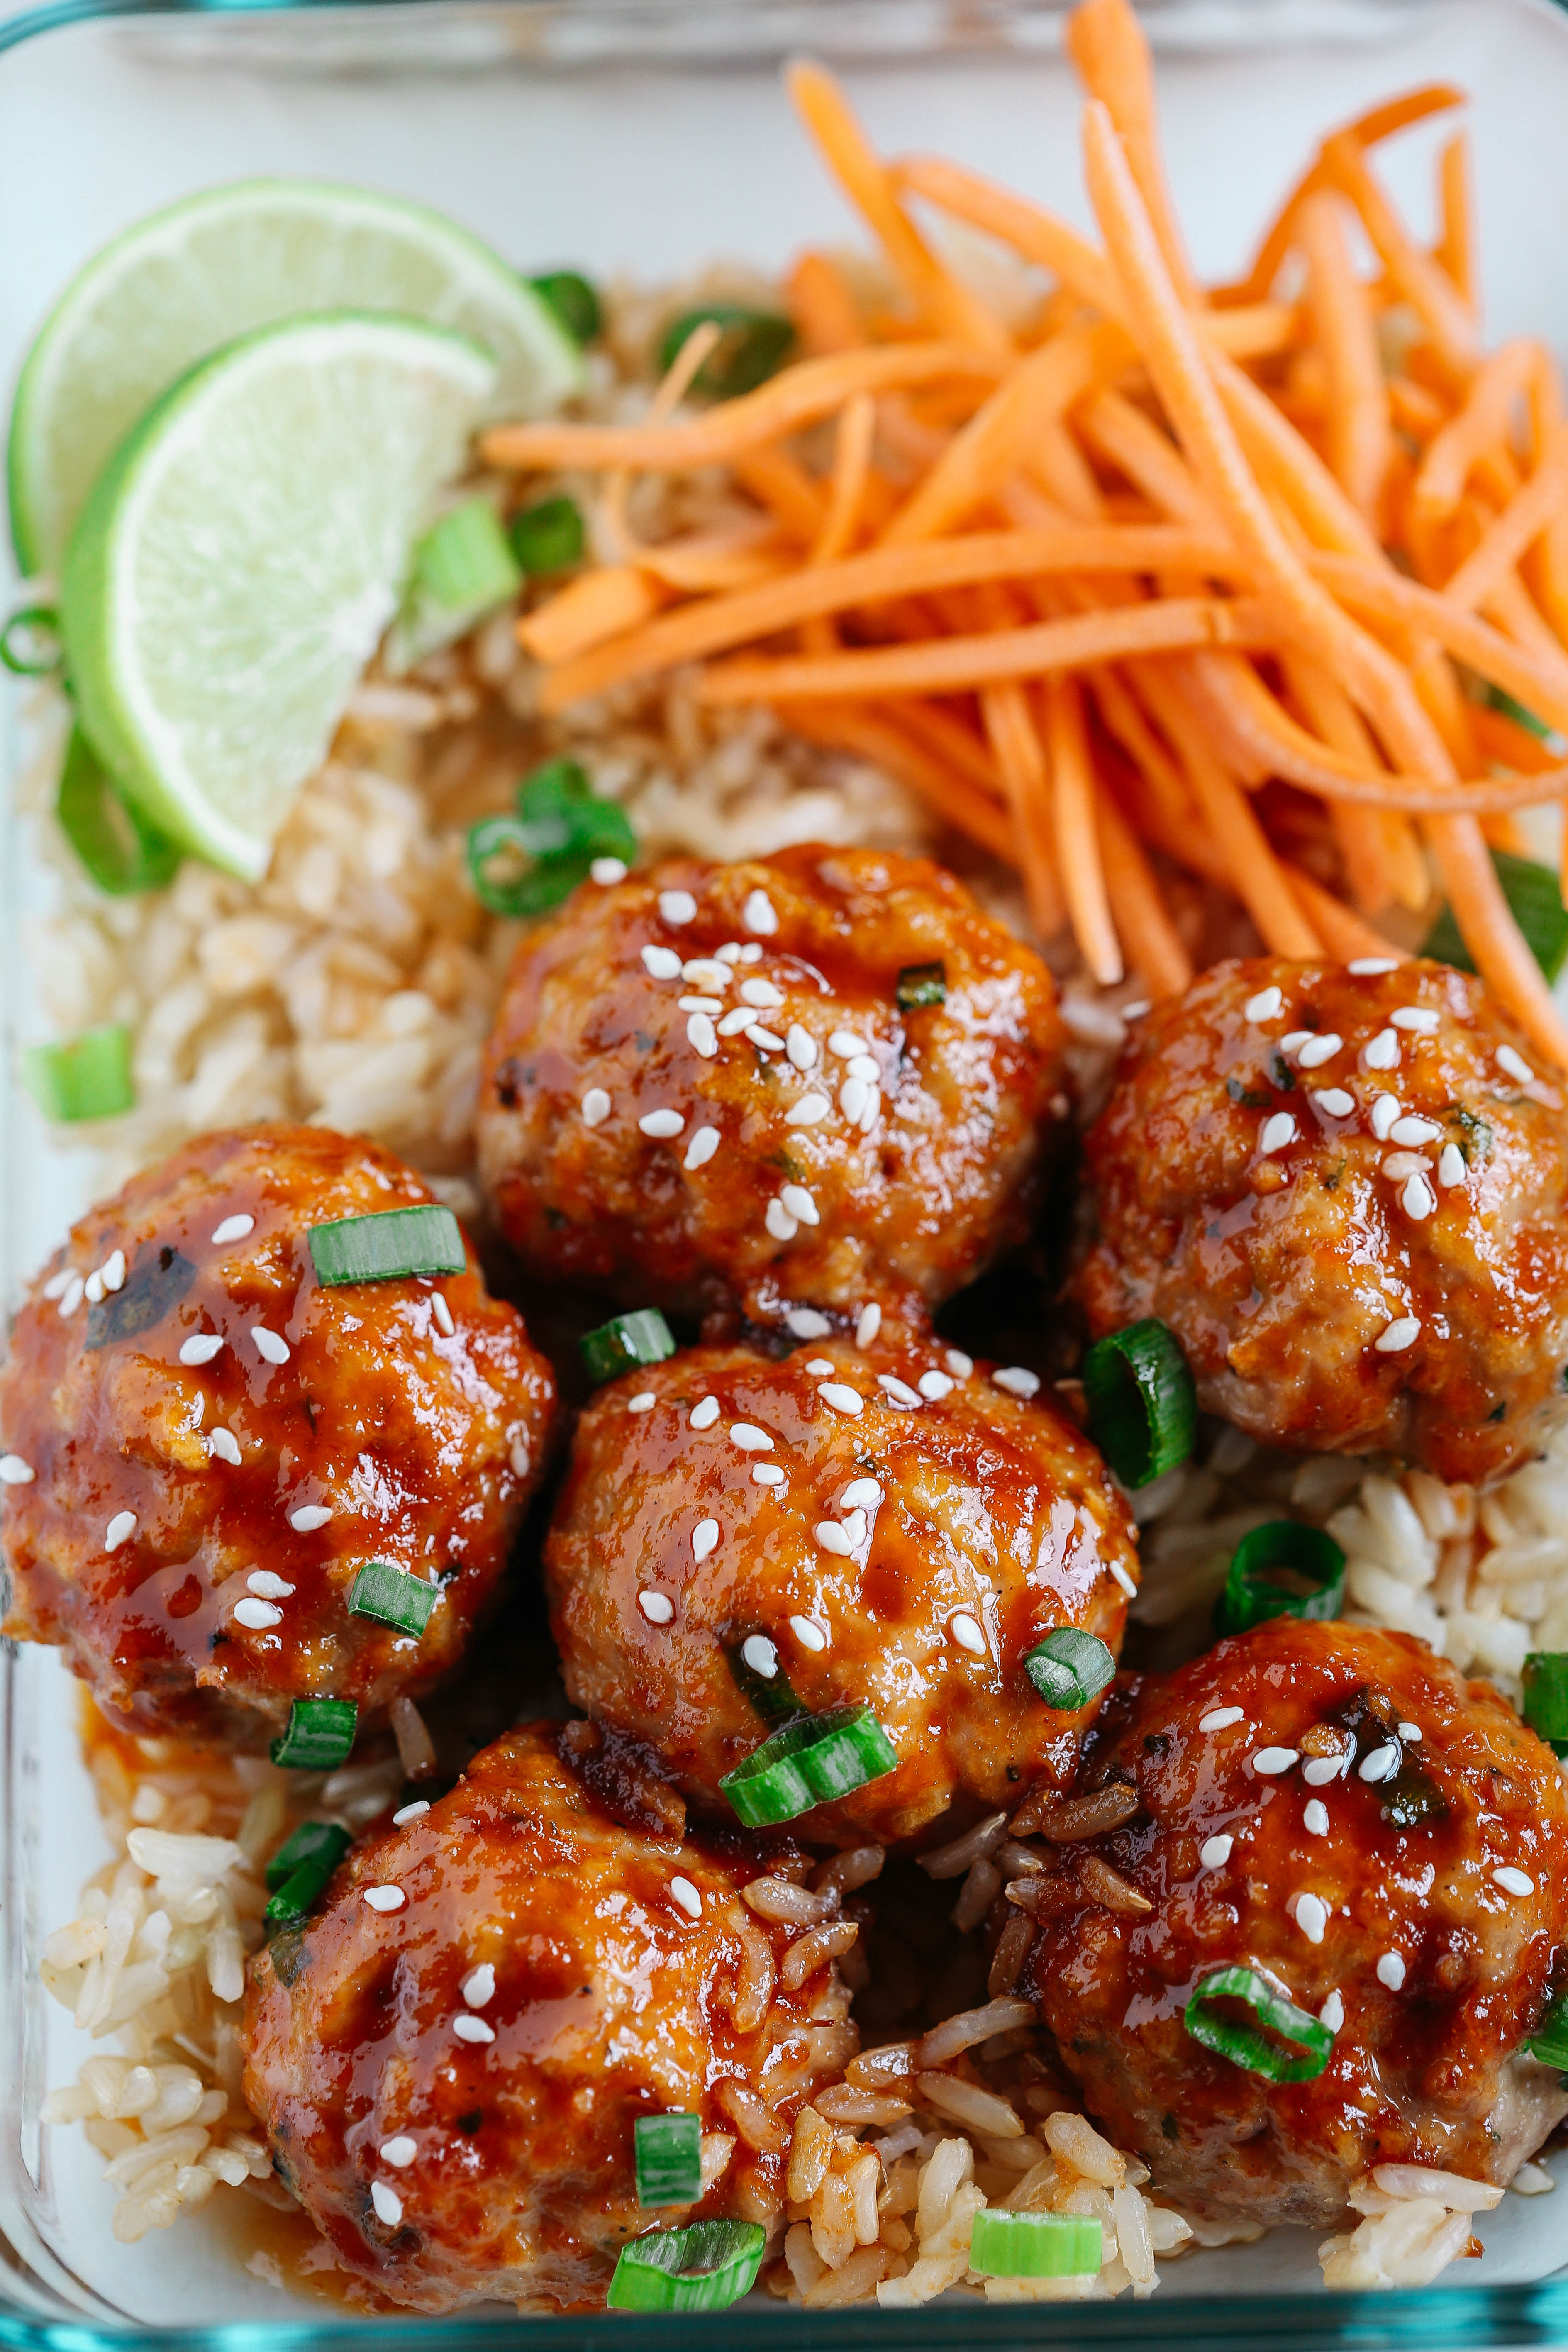 These Honey Sriracha Glazed Meatballs are sweet, spicy and full of so much flavor! They also take less than 30 minutes to make and are perfect for weekly meal prep!